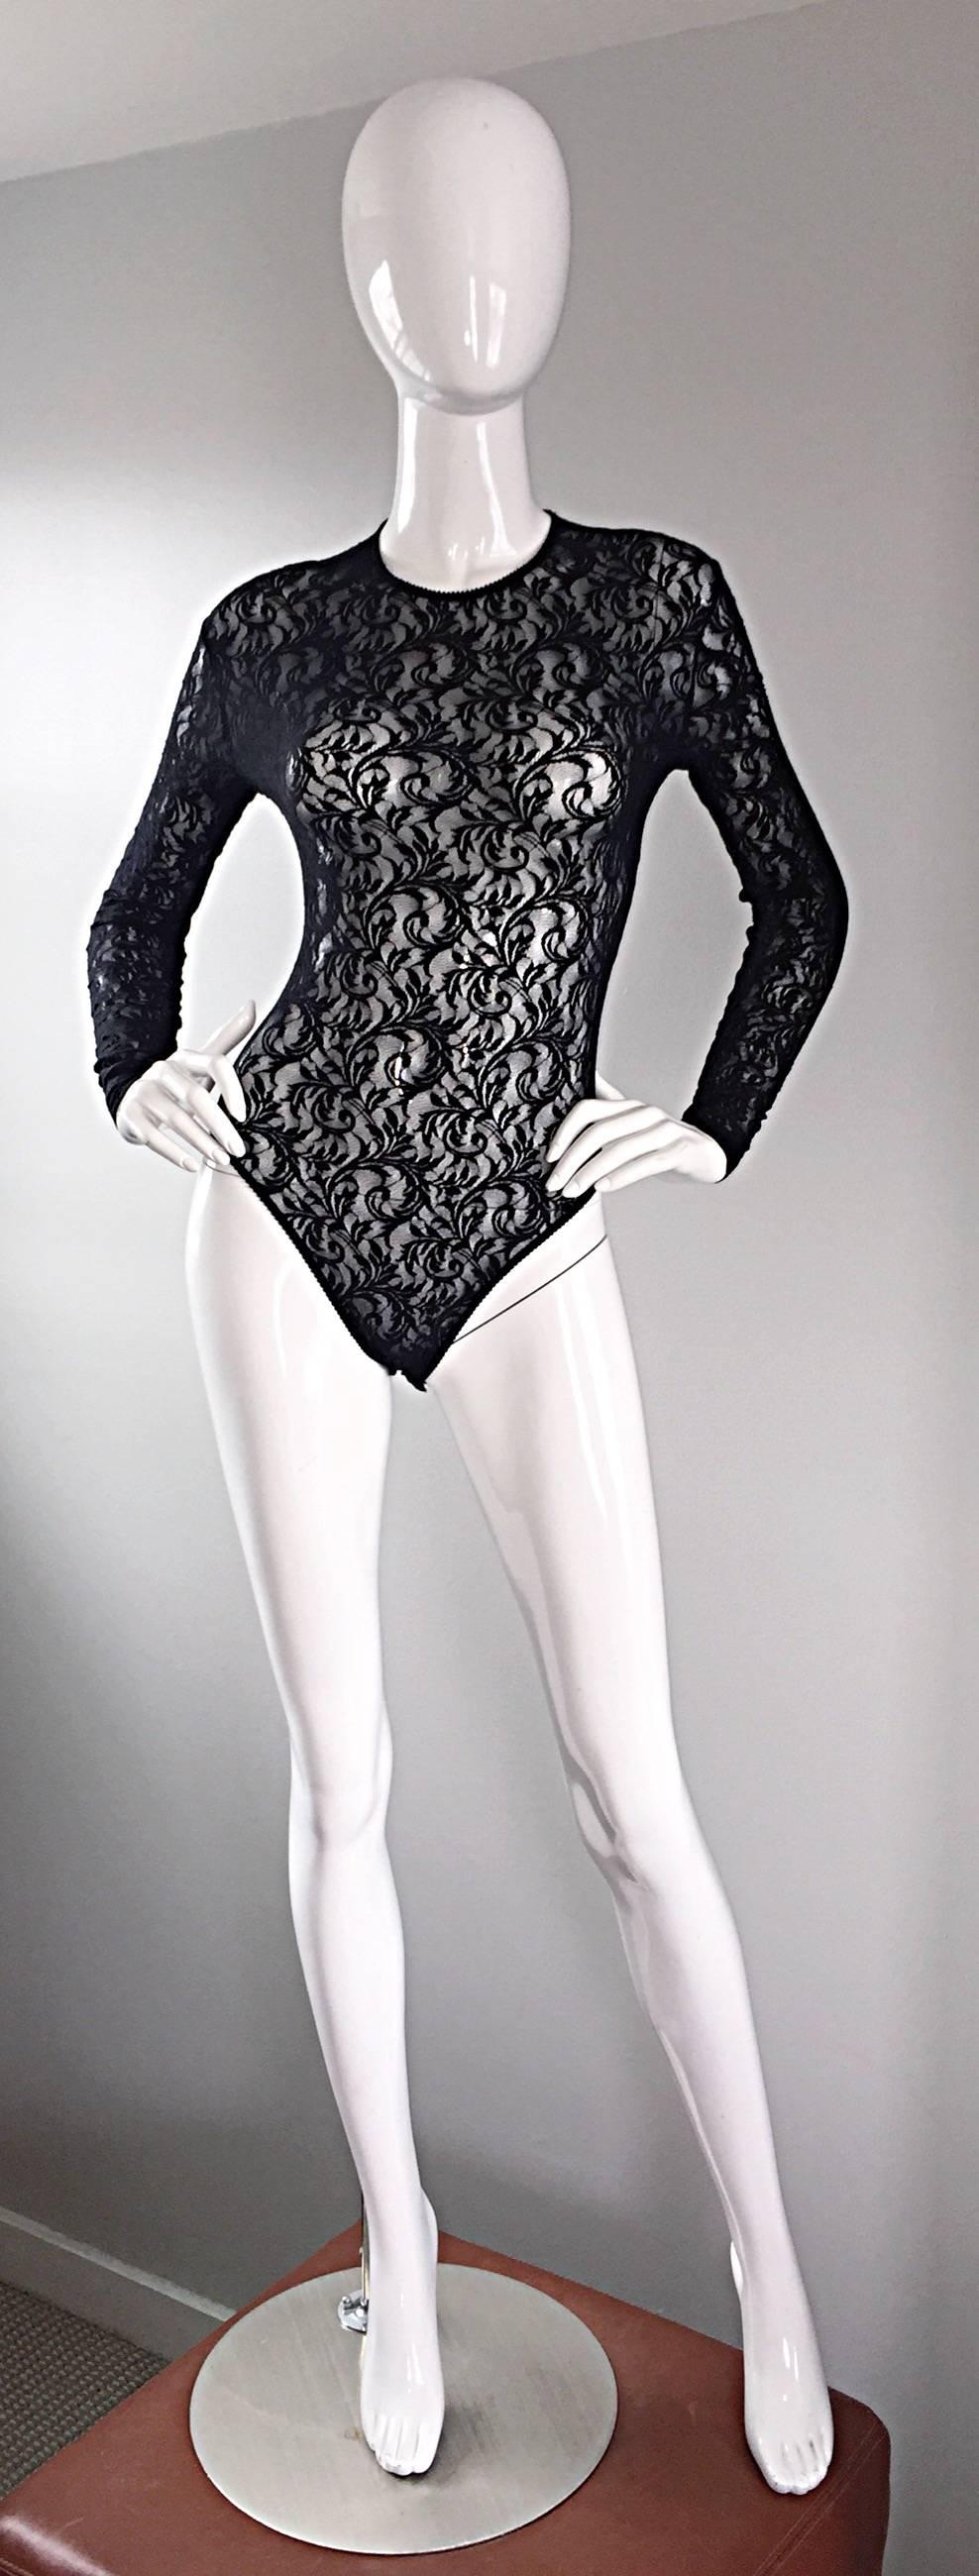 Sexy vintage rare early CALVIN KLEIN 1990s black lace bodysuit! All over black regal lace. Amazing bodycon fit, that is extremely versatile. Can easily transition from day to night---looks fantastic with jeans, shorts, trousers, a denim skirt, or a